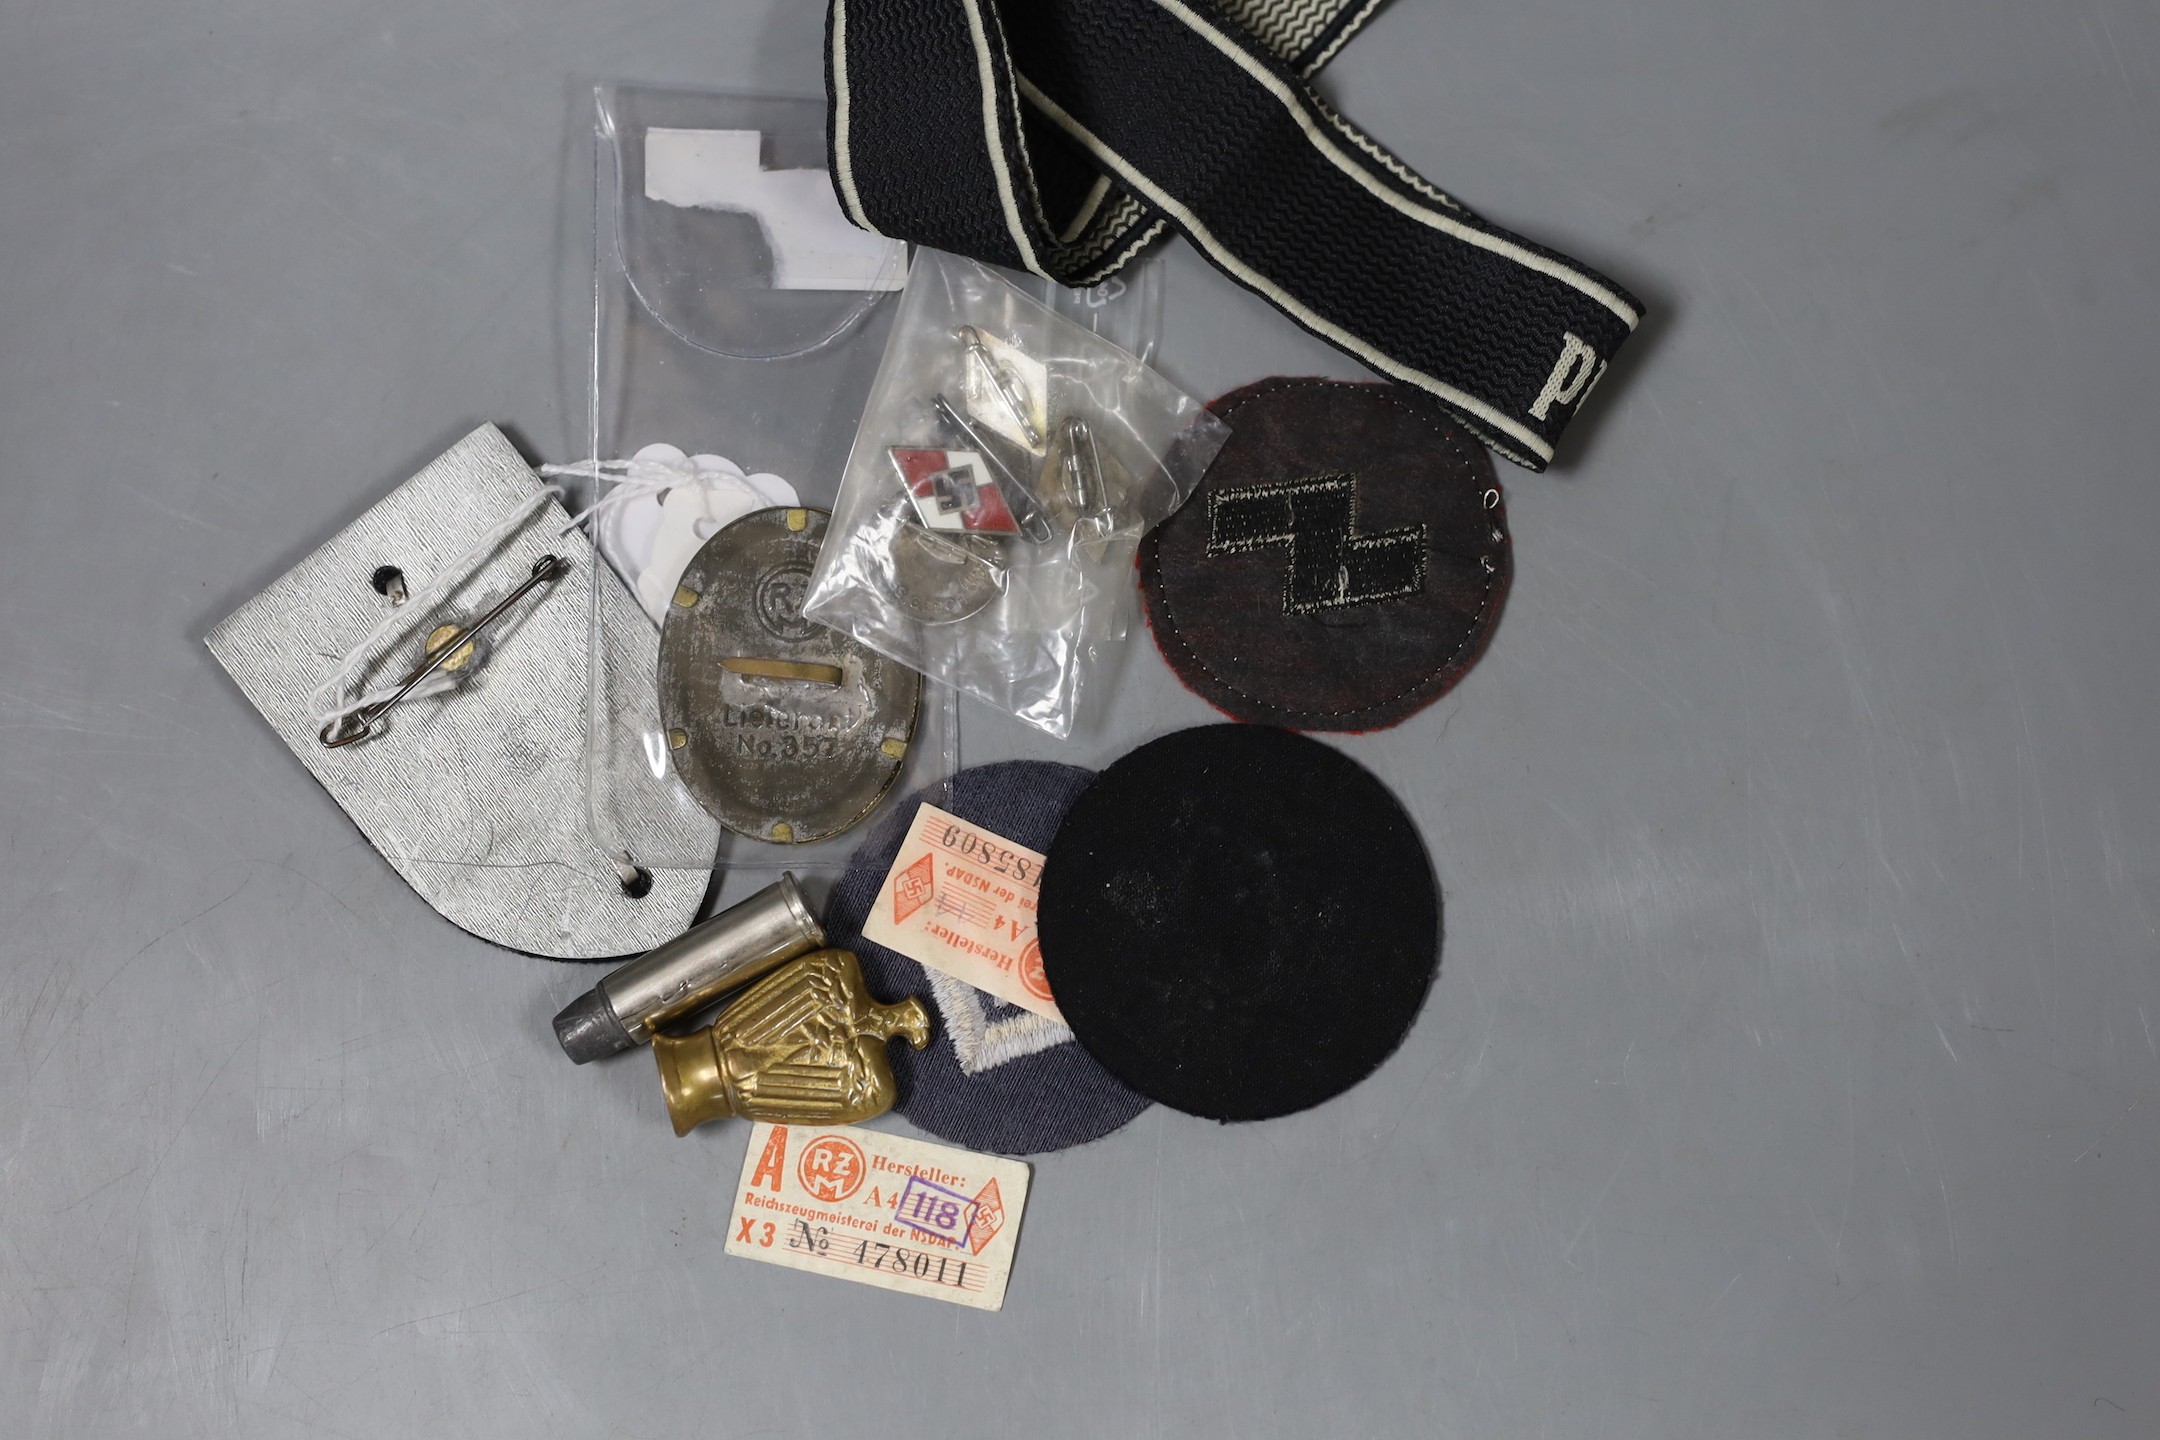 WWII German Third Reich badges, pins and ephemera including an SS badge - Image 2 of 2